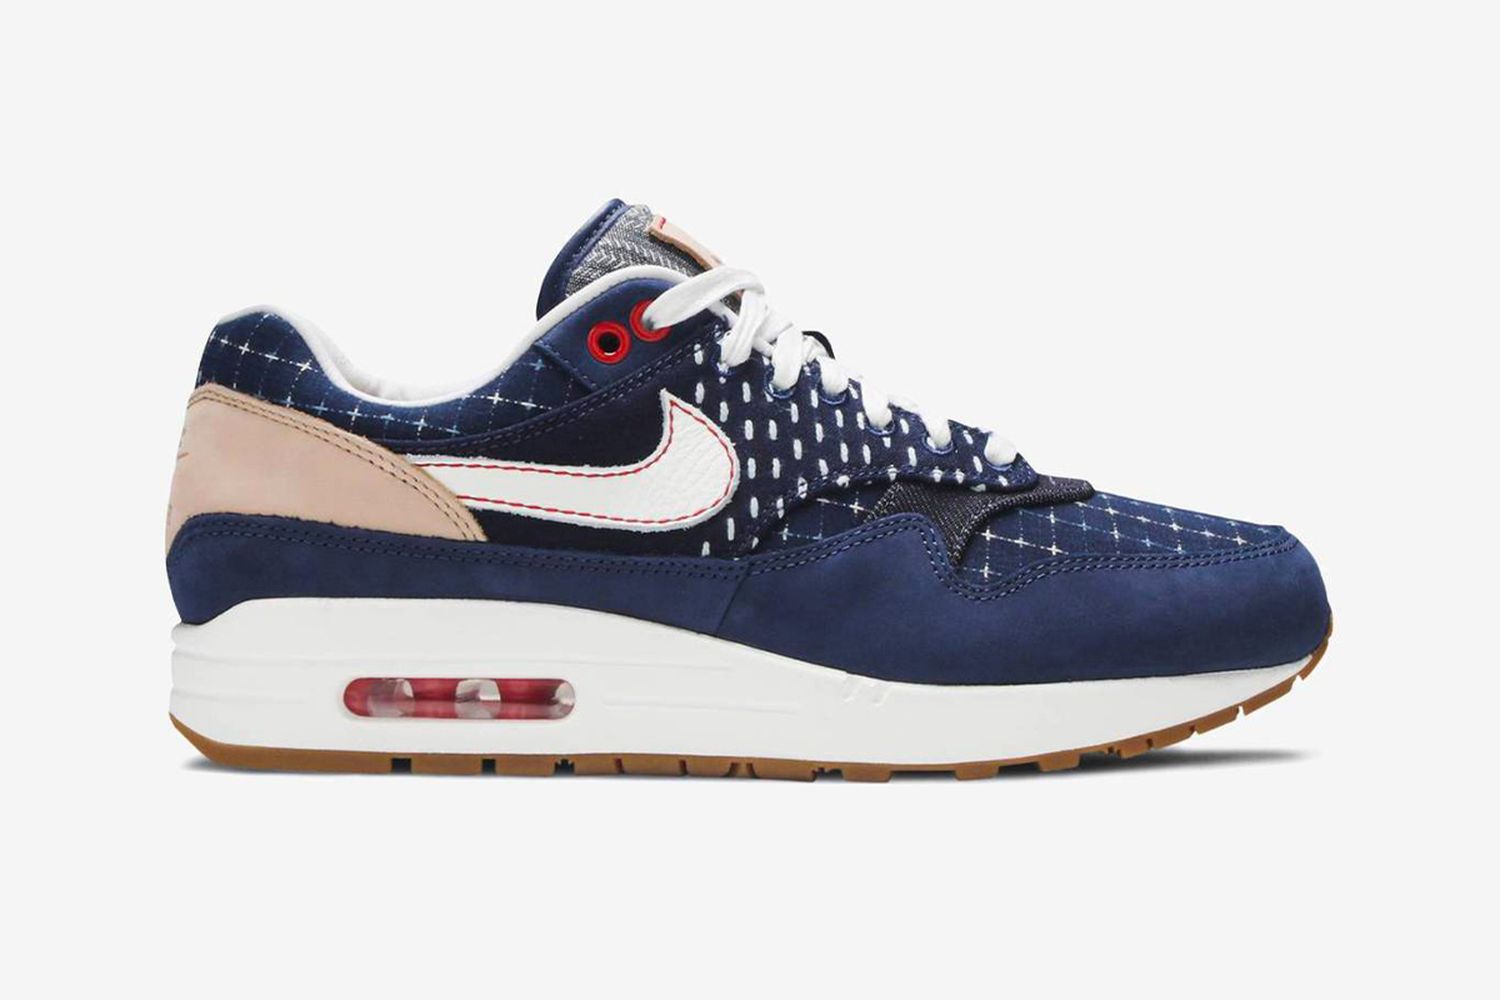 11 of the Best Nike Air Max 1 Colorways to Wear in 2021